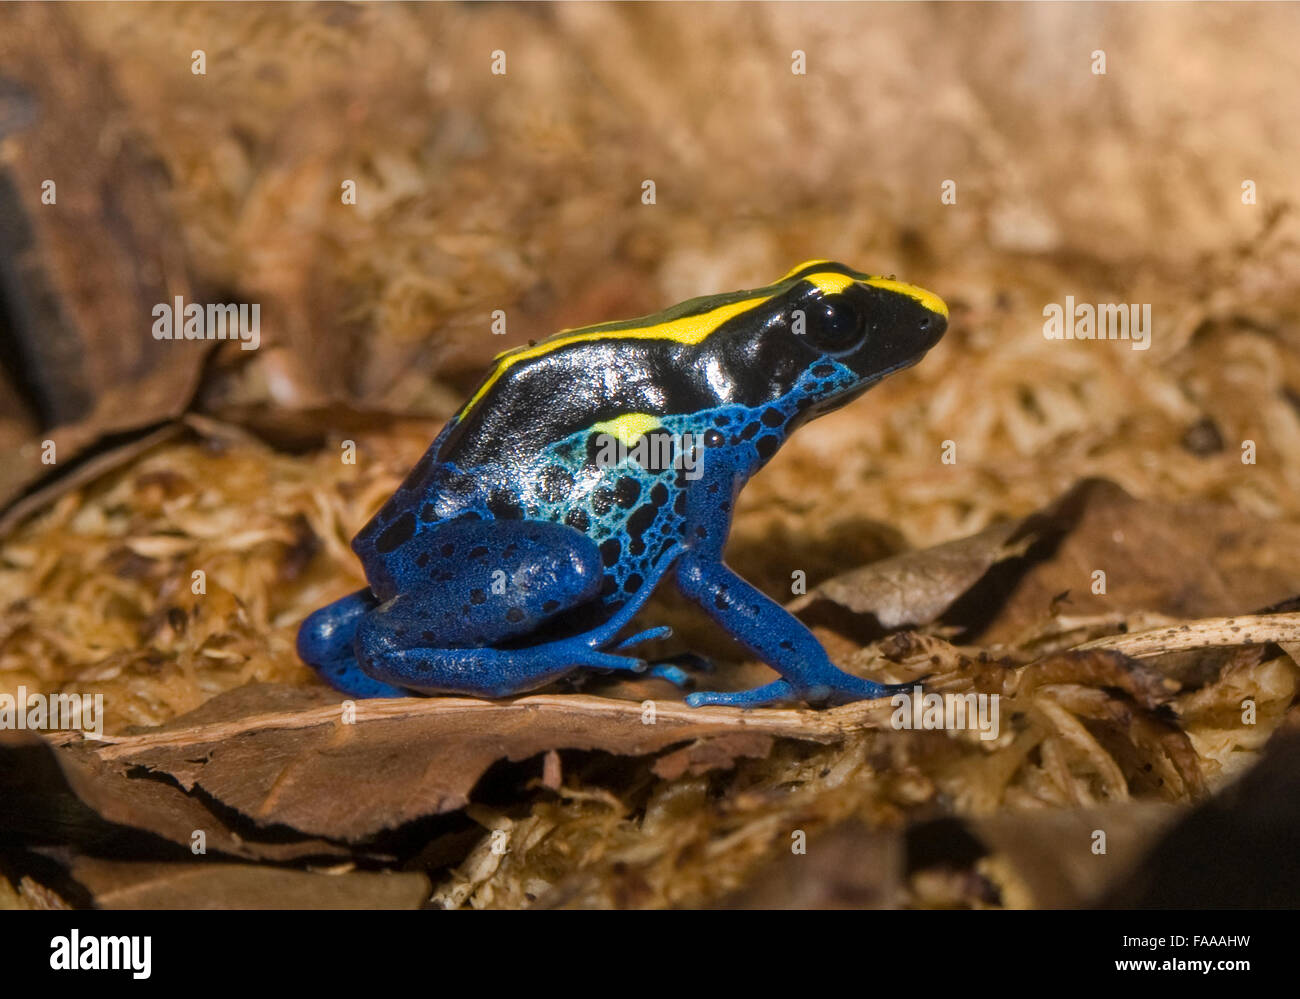 Poison dart frog, Dendrobates tinctorius. A small frog Native to South America. Known for its striking appearance and contrasting colours. Stock Photo